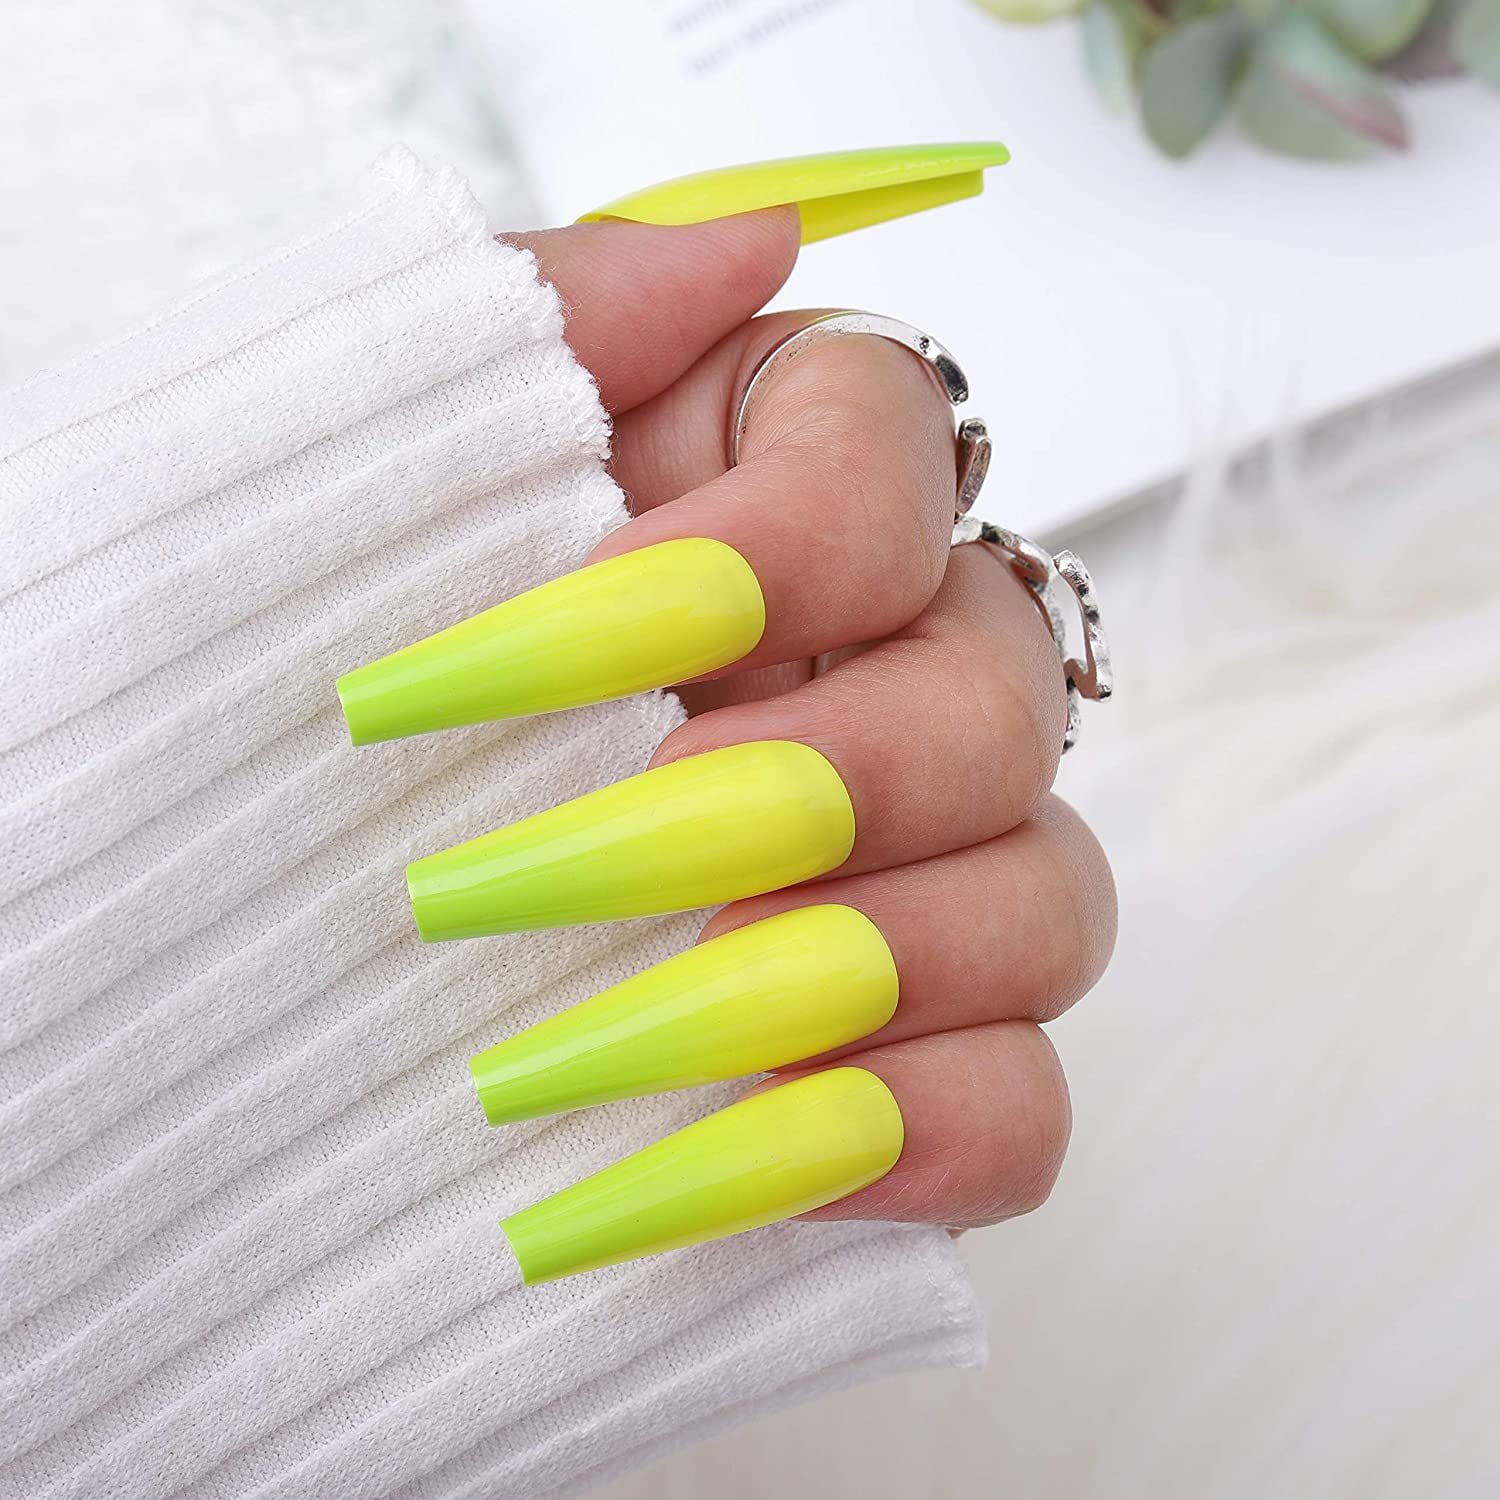 Eye Candy Nails & Training - Almond acrylics with neon yellow, green and  orange French and ombré by Amy Mitchell on 22 April 2017 at 11:40